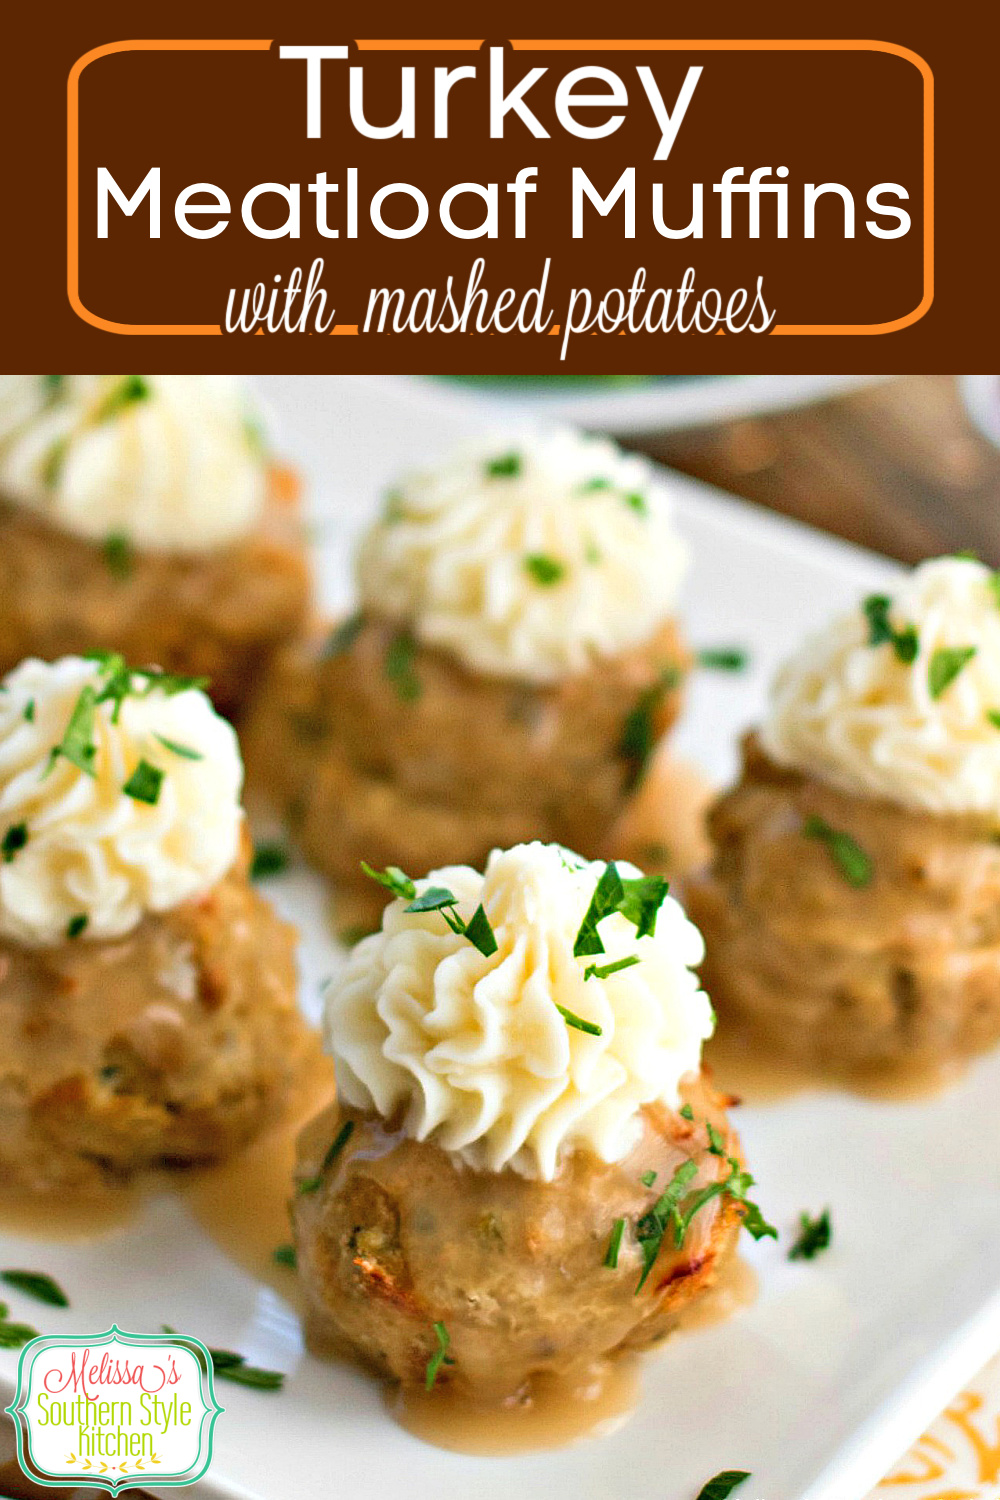 Top these mouthwatering turkey meatloaf muffins with a dollop of mashed potatoes for the finishing touch #meatloaf #turkeymeatloaf #meatloafmuffins #thanksgiving #fallrecipes #turkeyrecipes #kidfriendlyfood #dinner #dinnerideas #southernfood #southernrecipes #holidayrecipes via @melissasssk